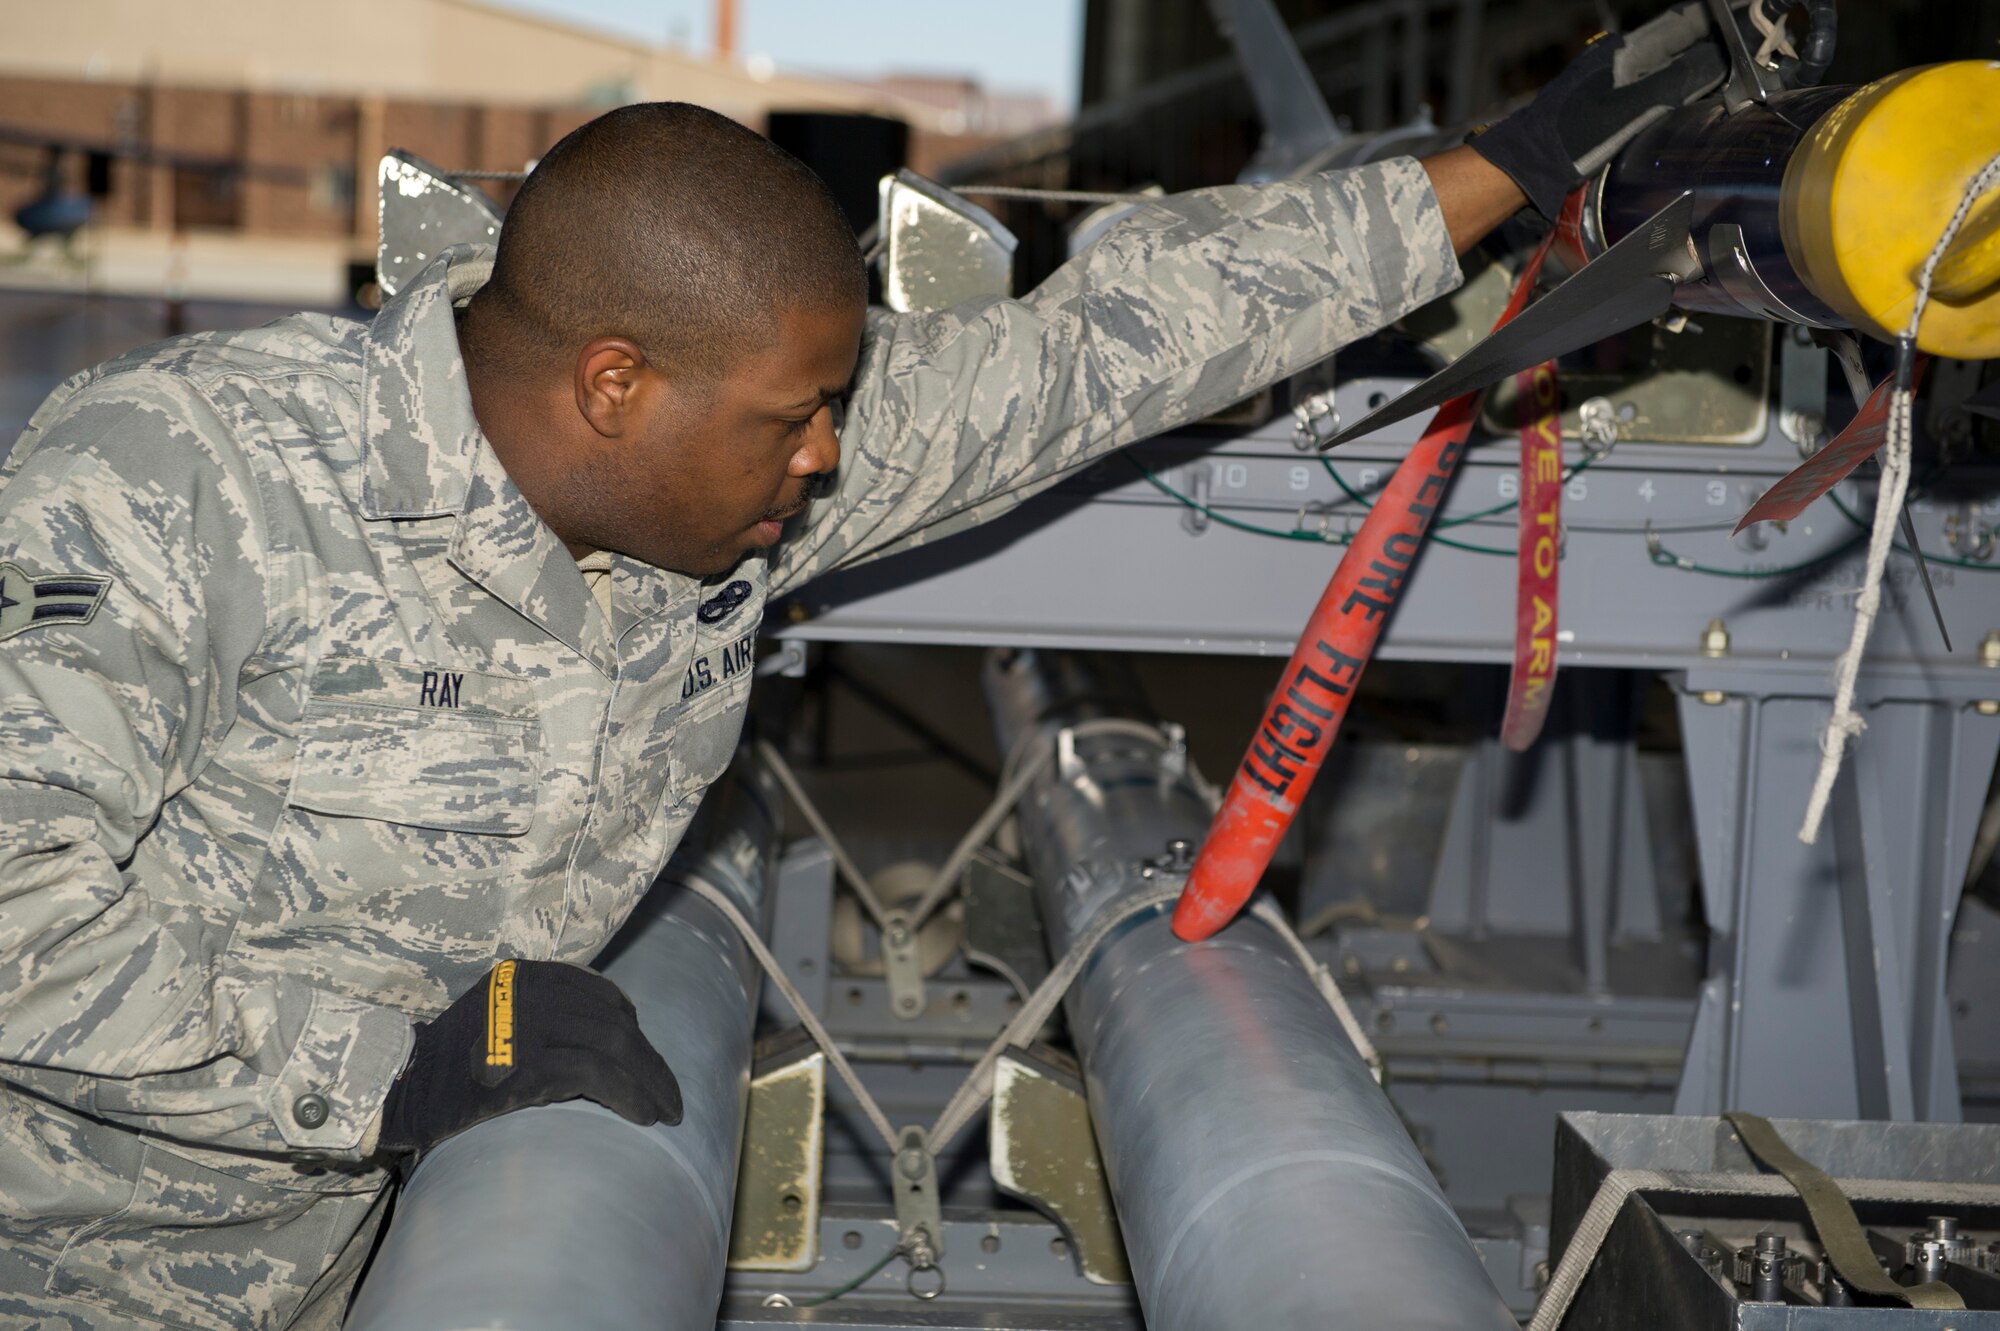 Airman 1st Class Orlandus Ray, 49th Aircraft Maintenance Squadron weapons-load- crew member, prepares inert missiles for a quarterly load crew competition at Holloman Air Force Base, N.M., Jan. 17. This was the last load crew competition that the F-22 Raptor will participate in at Holloman. The F-22 Raptor load crew competed to have their skills evaluated alongside the MQ-9 Reaper and the German Air Force Tornado Load crews. For the competition, points were awarded for weapons loading, tool kit inspection and uniform inspection. (U.S. Air Force photo by Airman 1st Class Chase Cannon/Released)